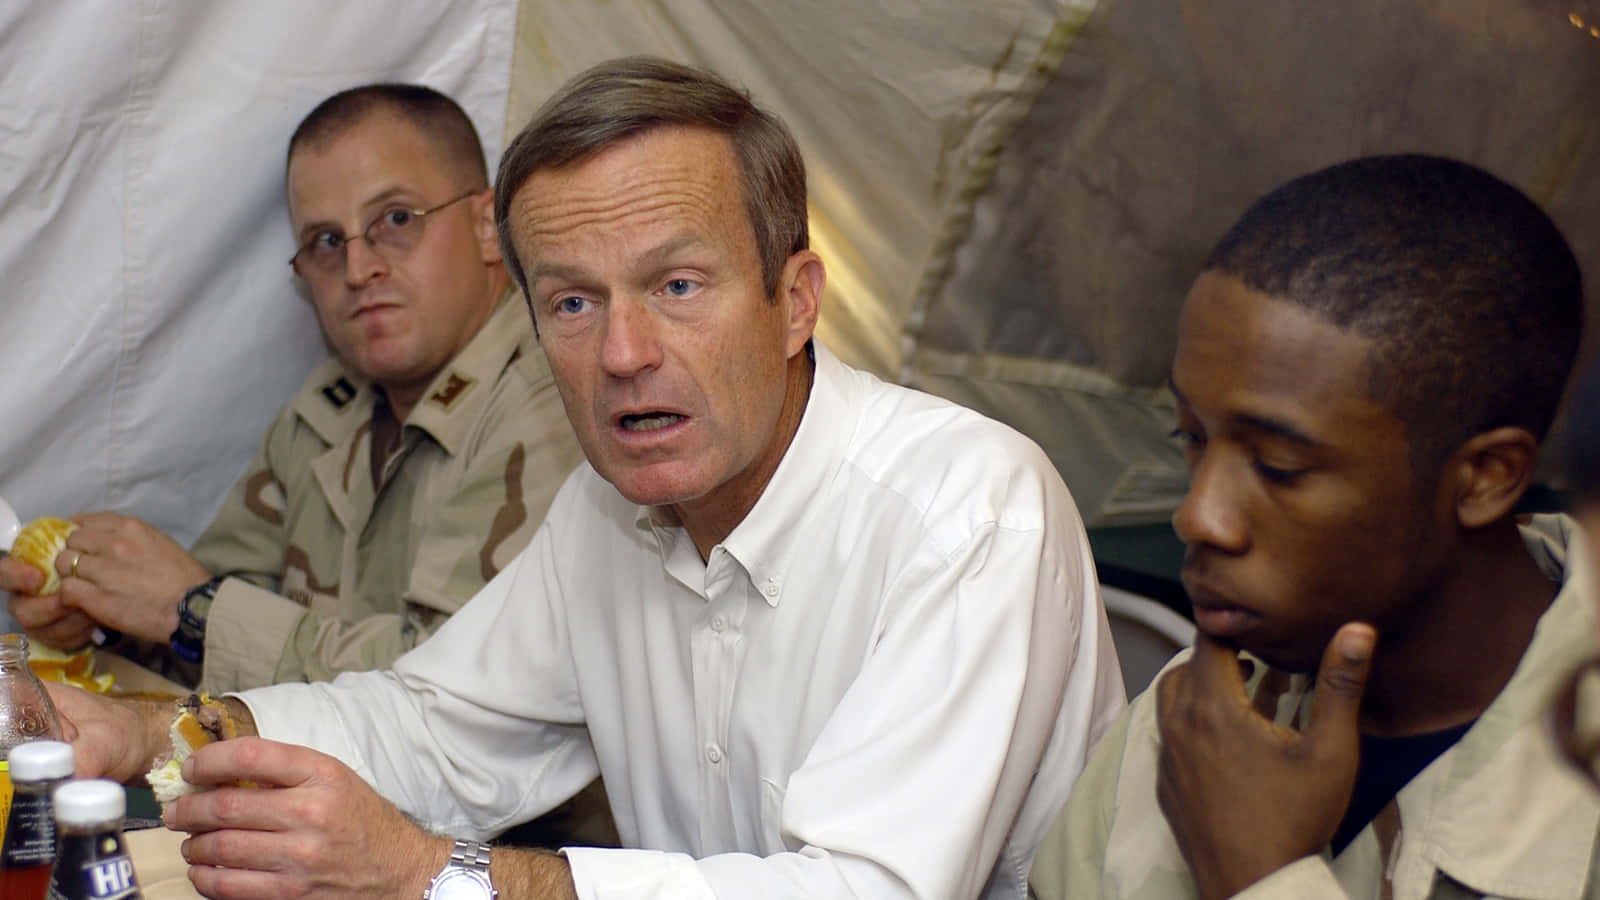 Todd Akin With Soldiers Wallpaper